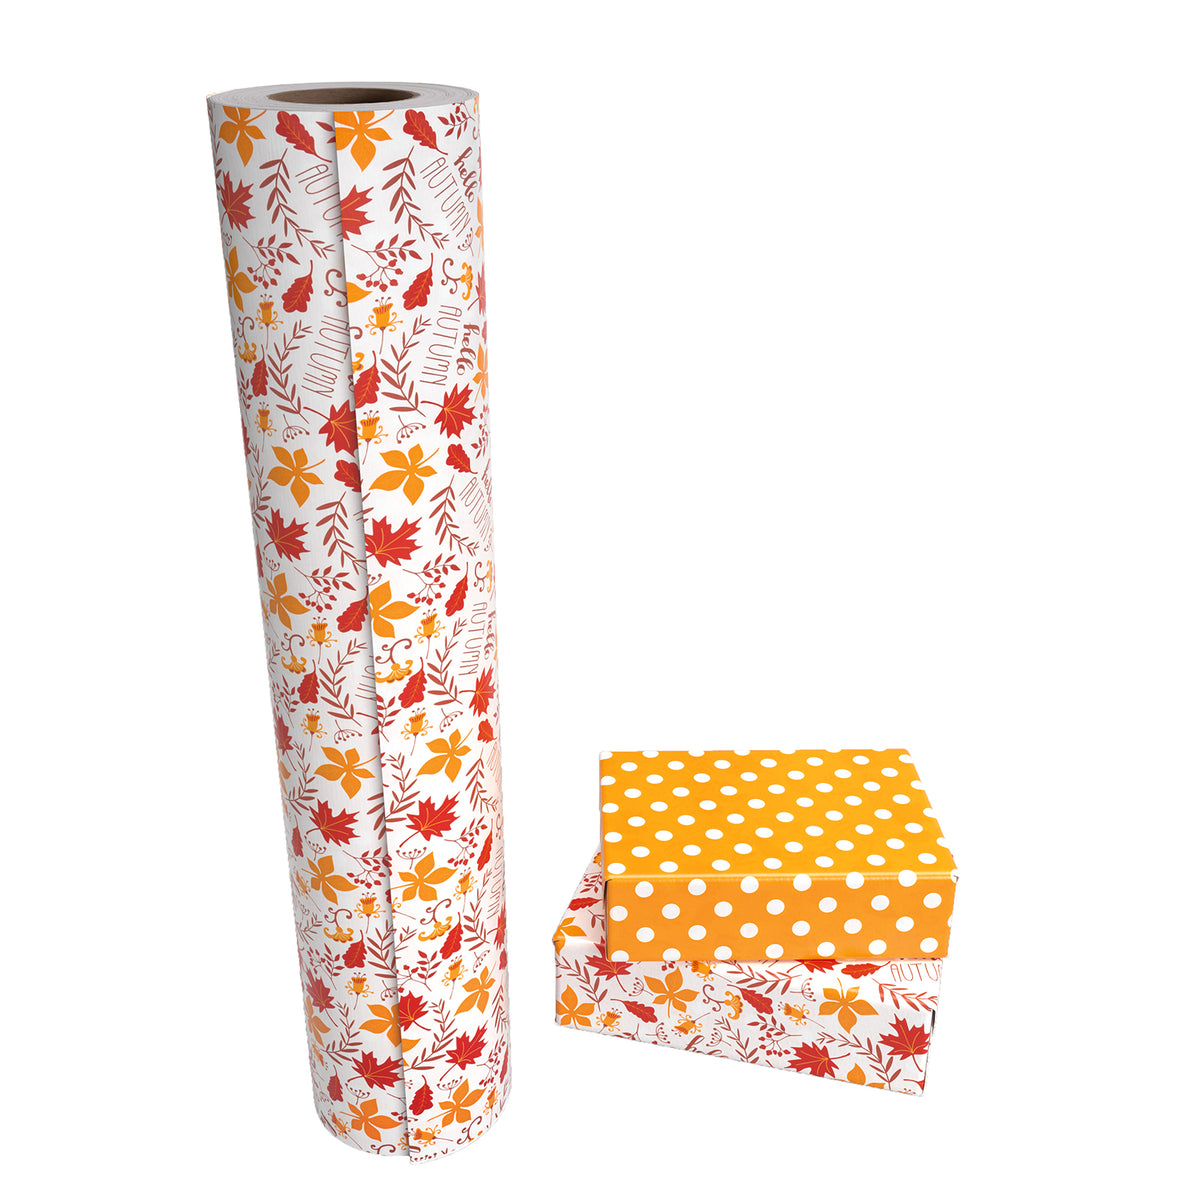 Smile: Luxi Jumbo Wrapping Paper Roll (3 Pack) Large 30 x 120 per  Roll - Gold Print in 3 different Des…